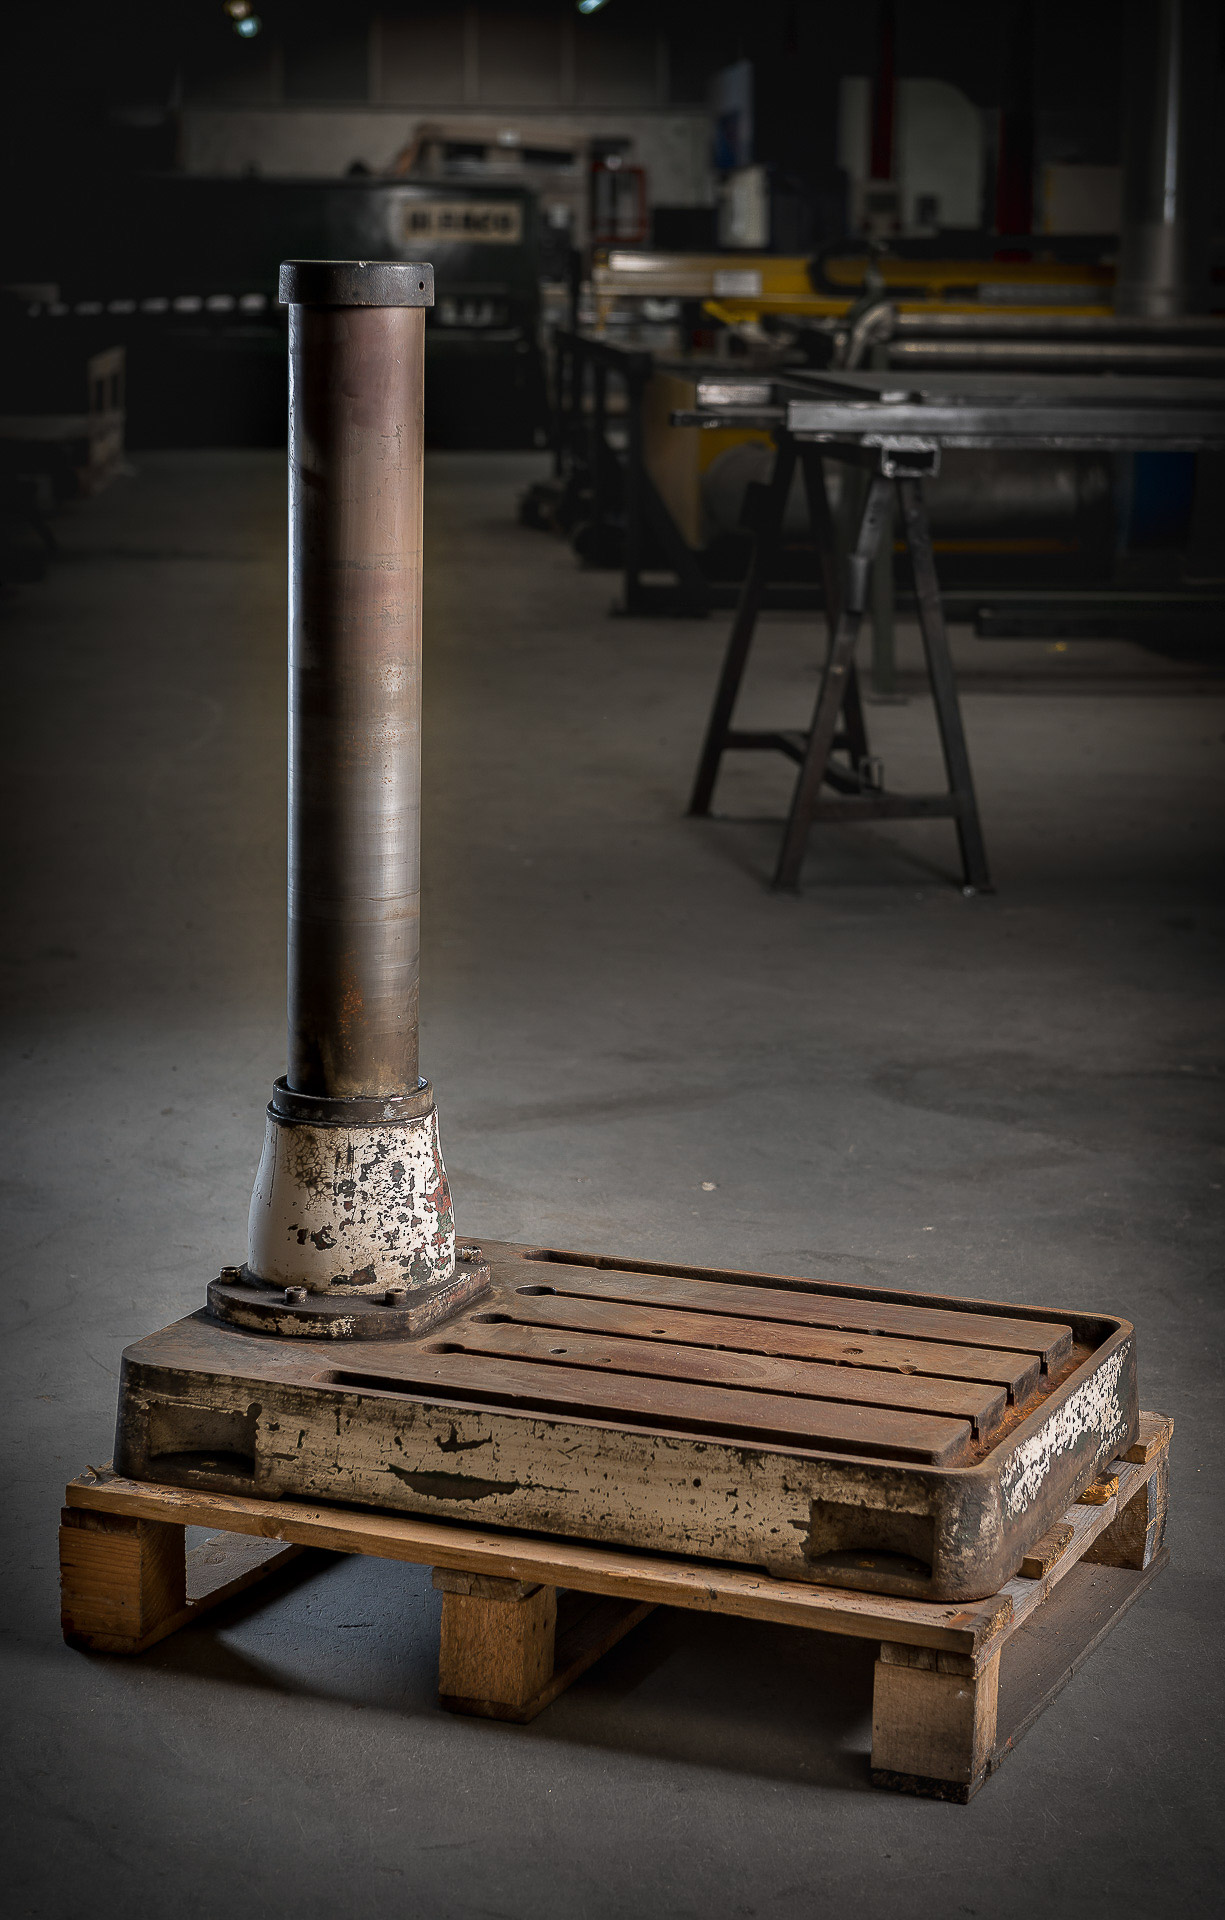 Shooting photo industrie du recyclage